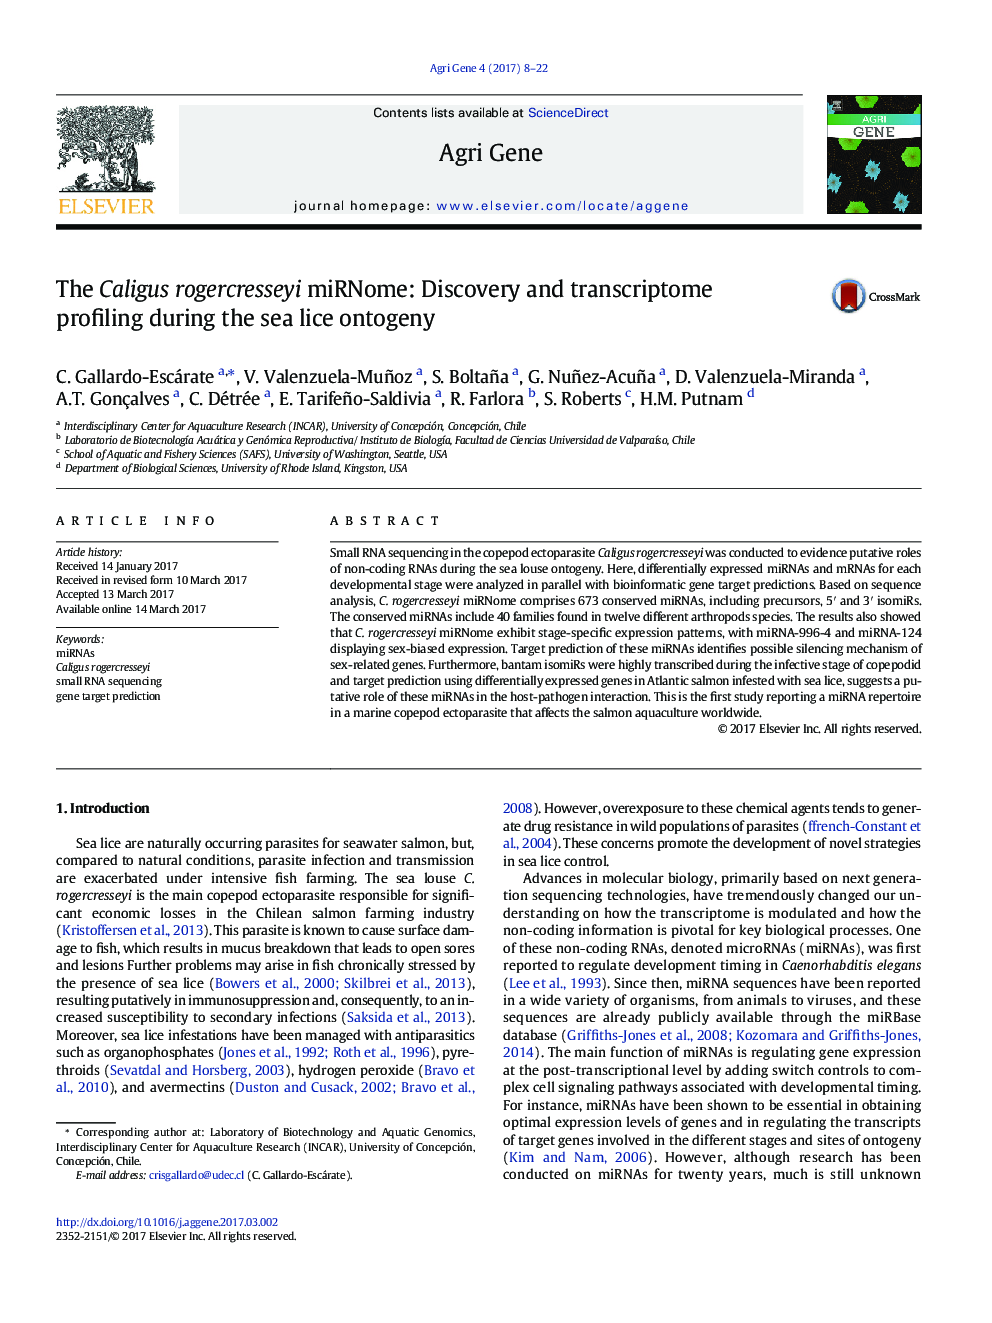 The Caligus rogercresseyi miRNome: Discovery and transcriptome profiling during the sea lice ontogeny